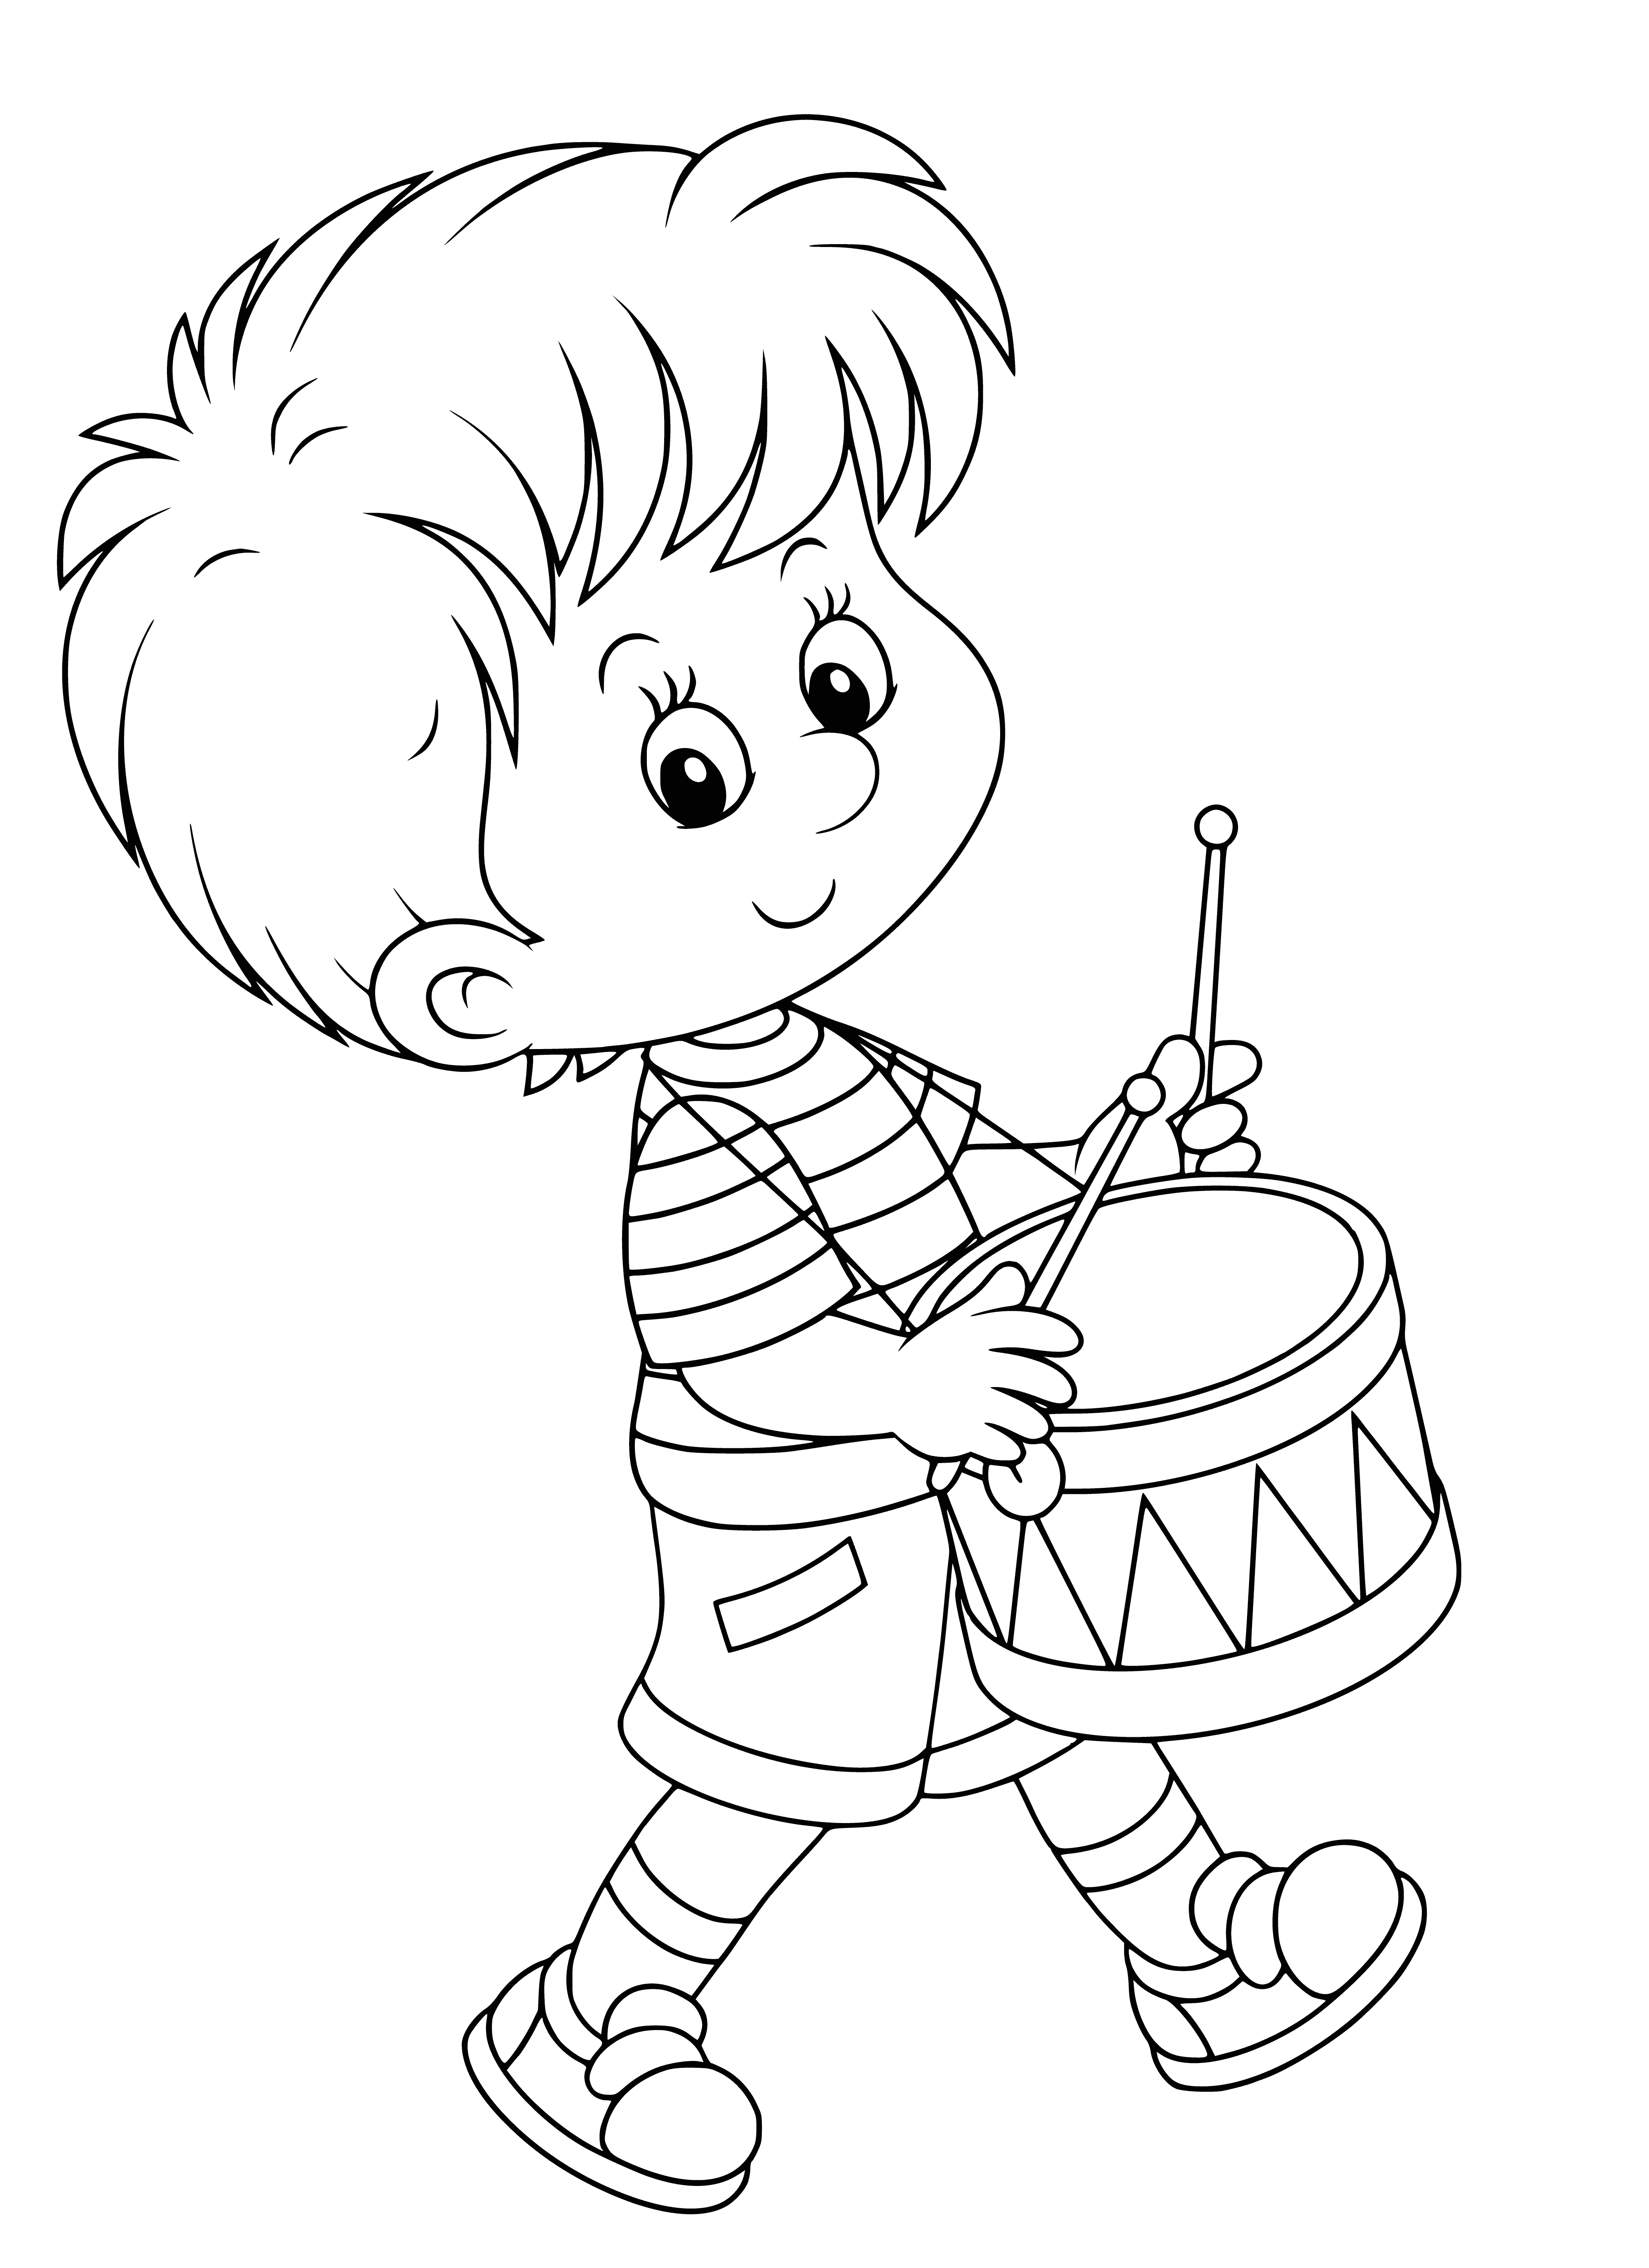 Music lesson coloring page